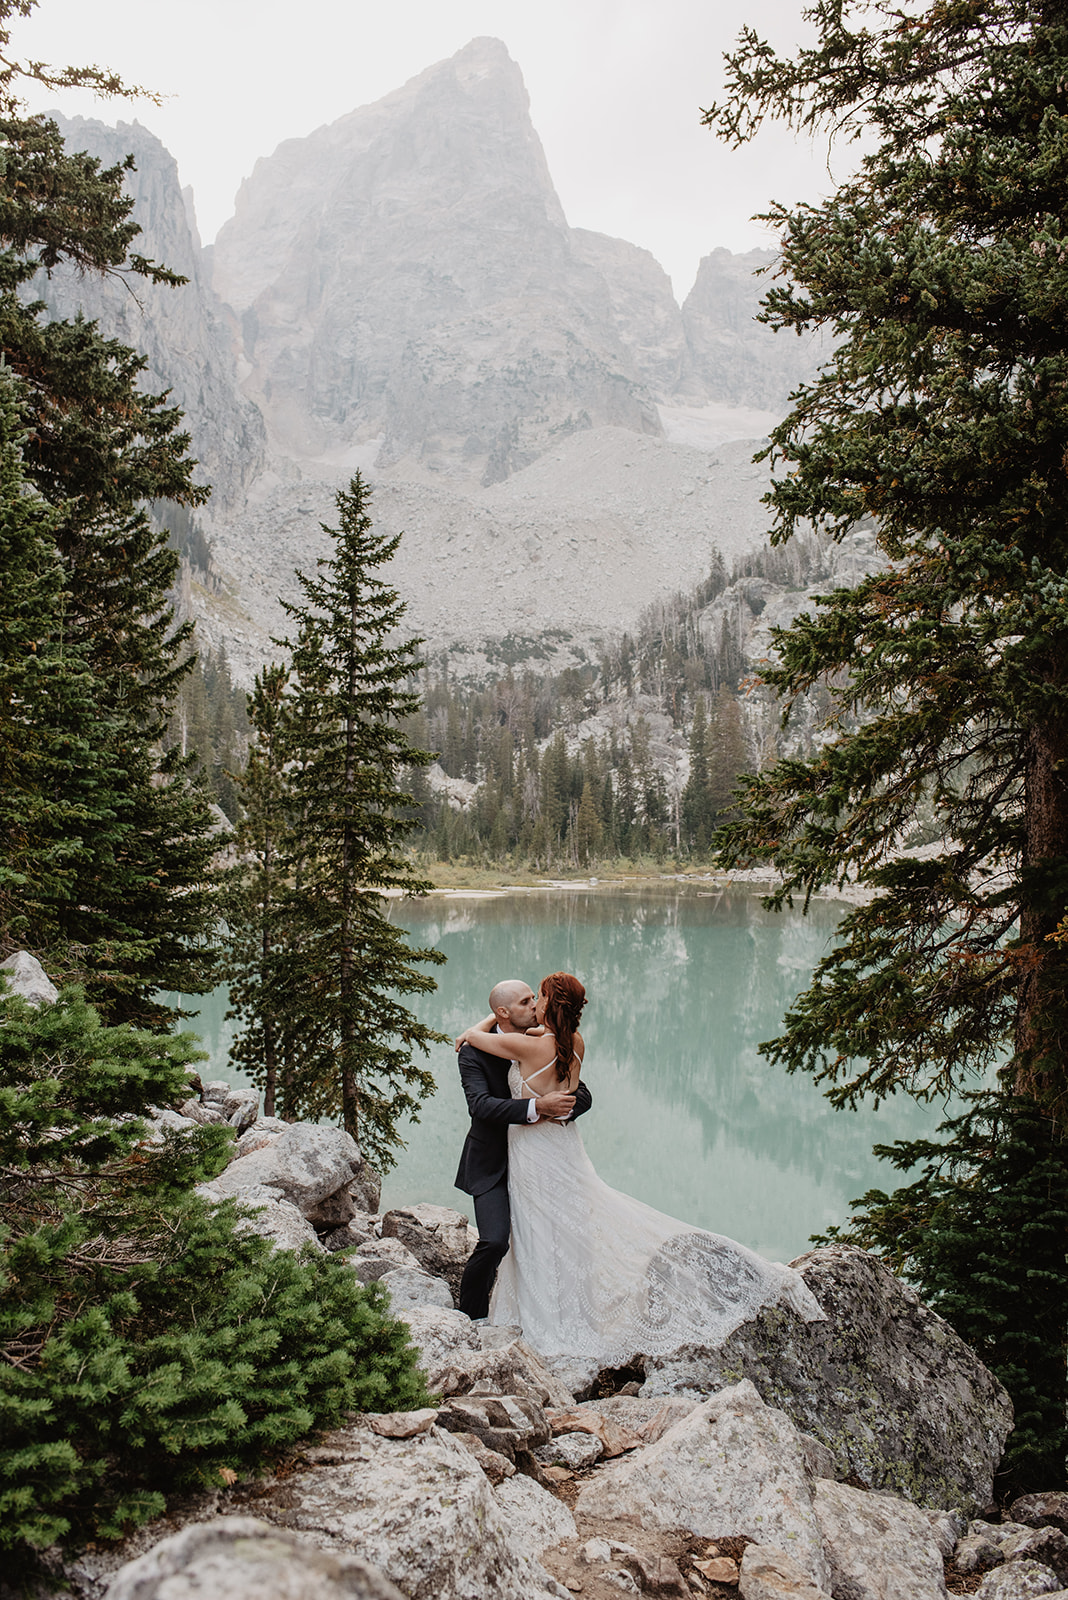 wedding day picture of a bride and groom embracing each other while standing on rocks in a forrest and looking out into a crystal cler lake with the Grand Tetons towering over them